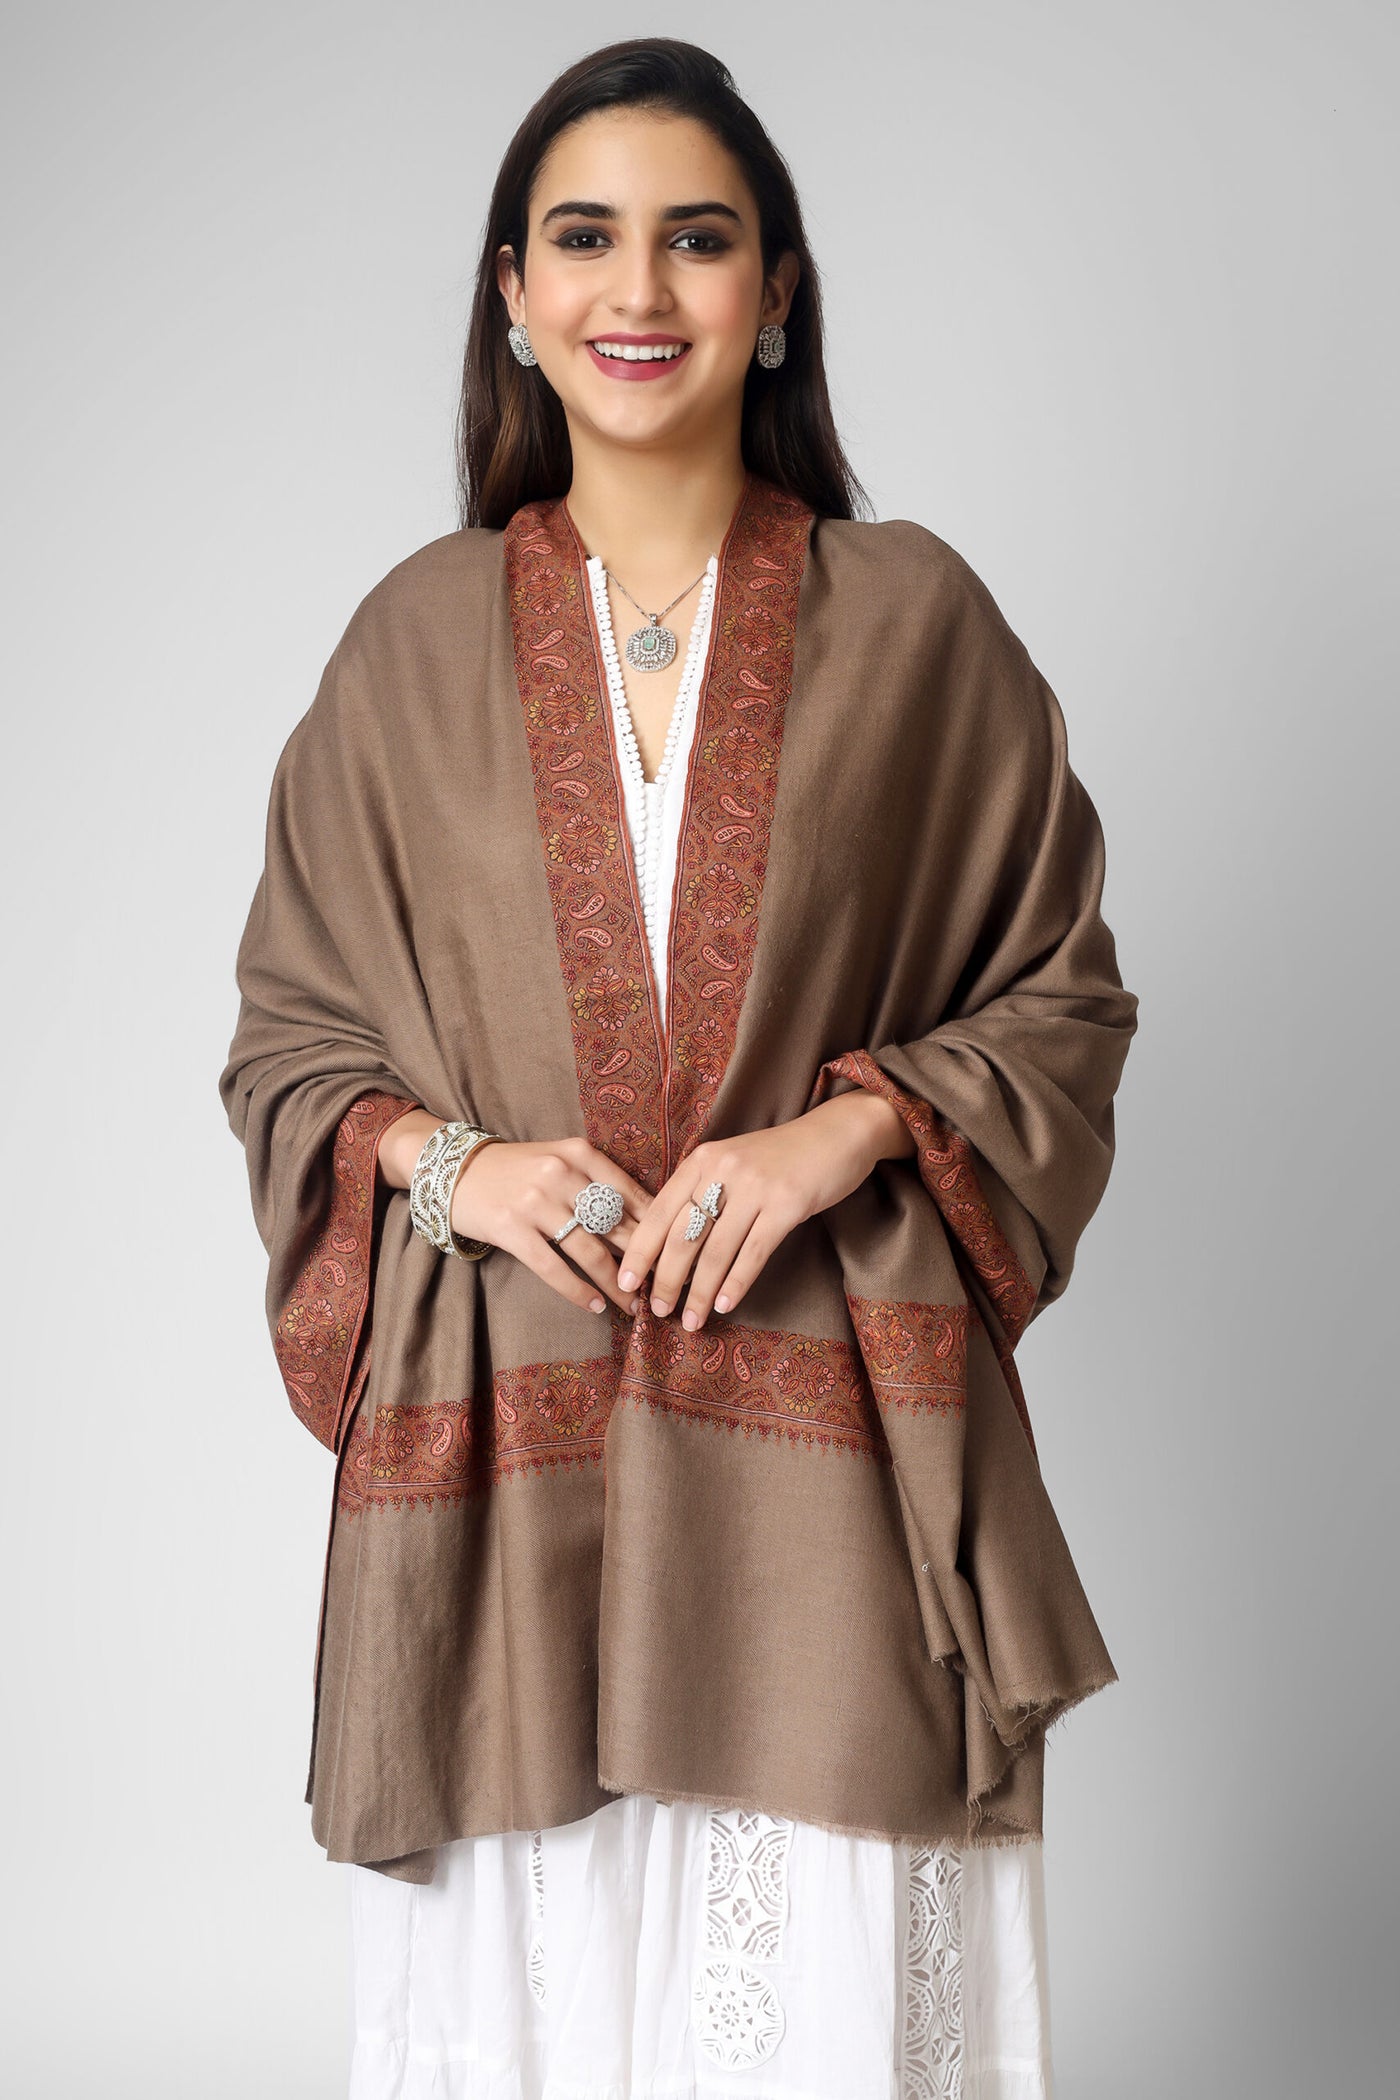 Treat  your loved ones to the timeless elegance of our authentic, hand-loomed toosh color border pashmina shawls. Made from natural pashmina our shawls feature intricate embroidery and exquisite designs that are perfect for any fashion-conscious individual looking to add a touch of sophistication to their wardrobe. 